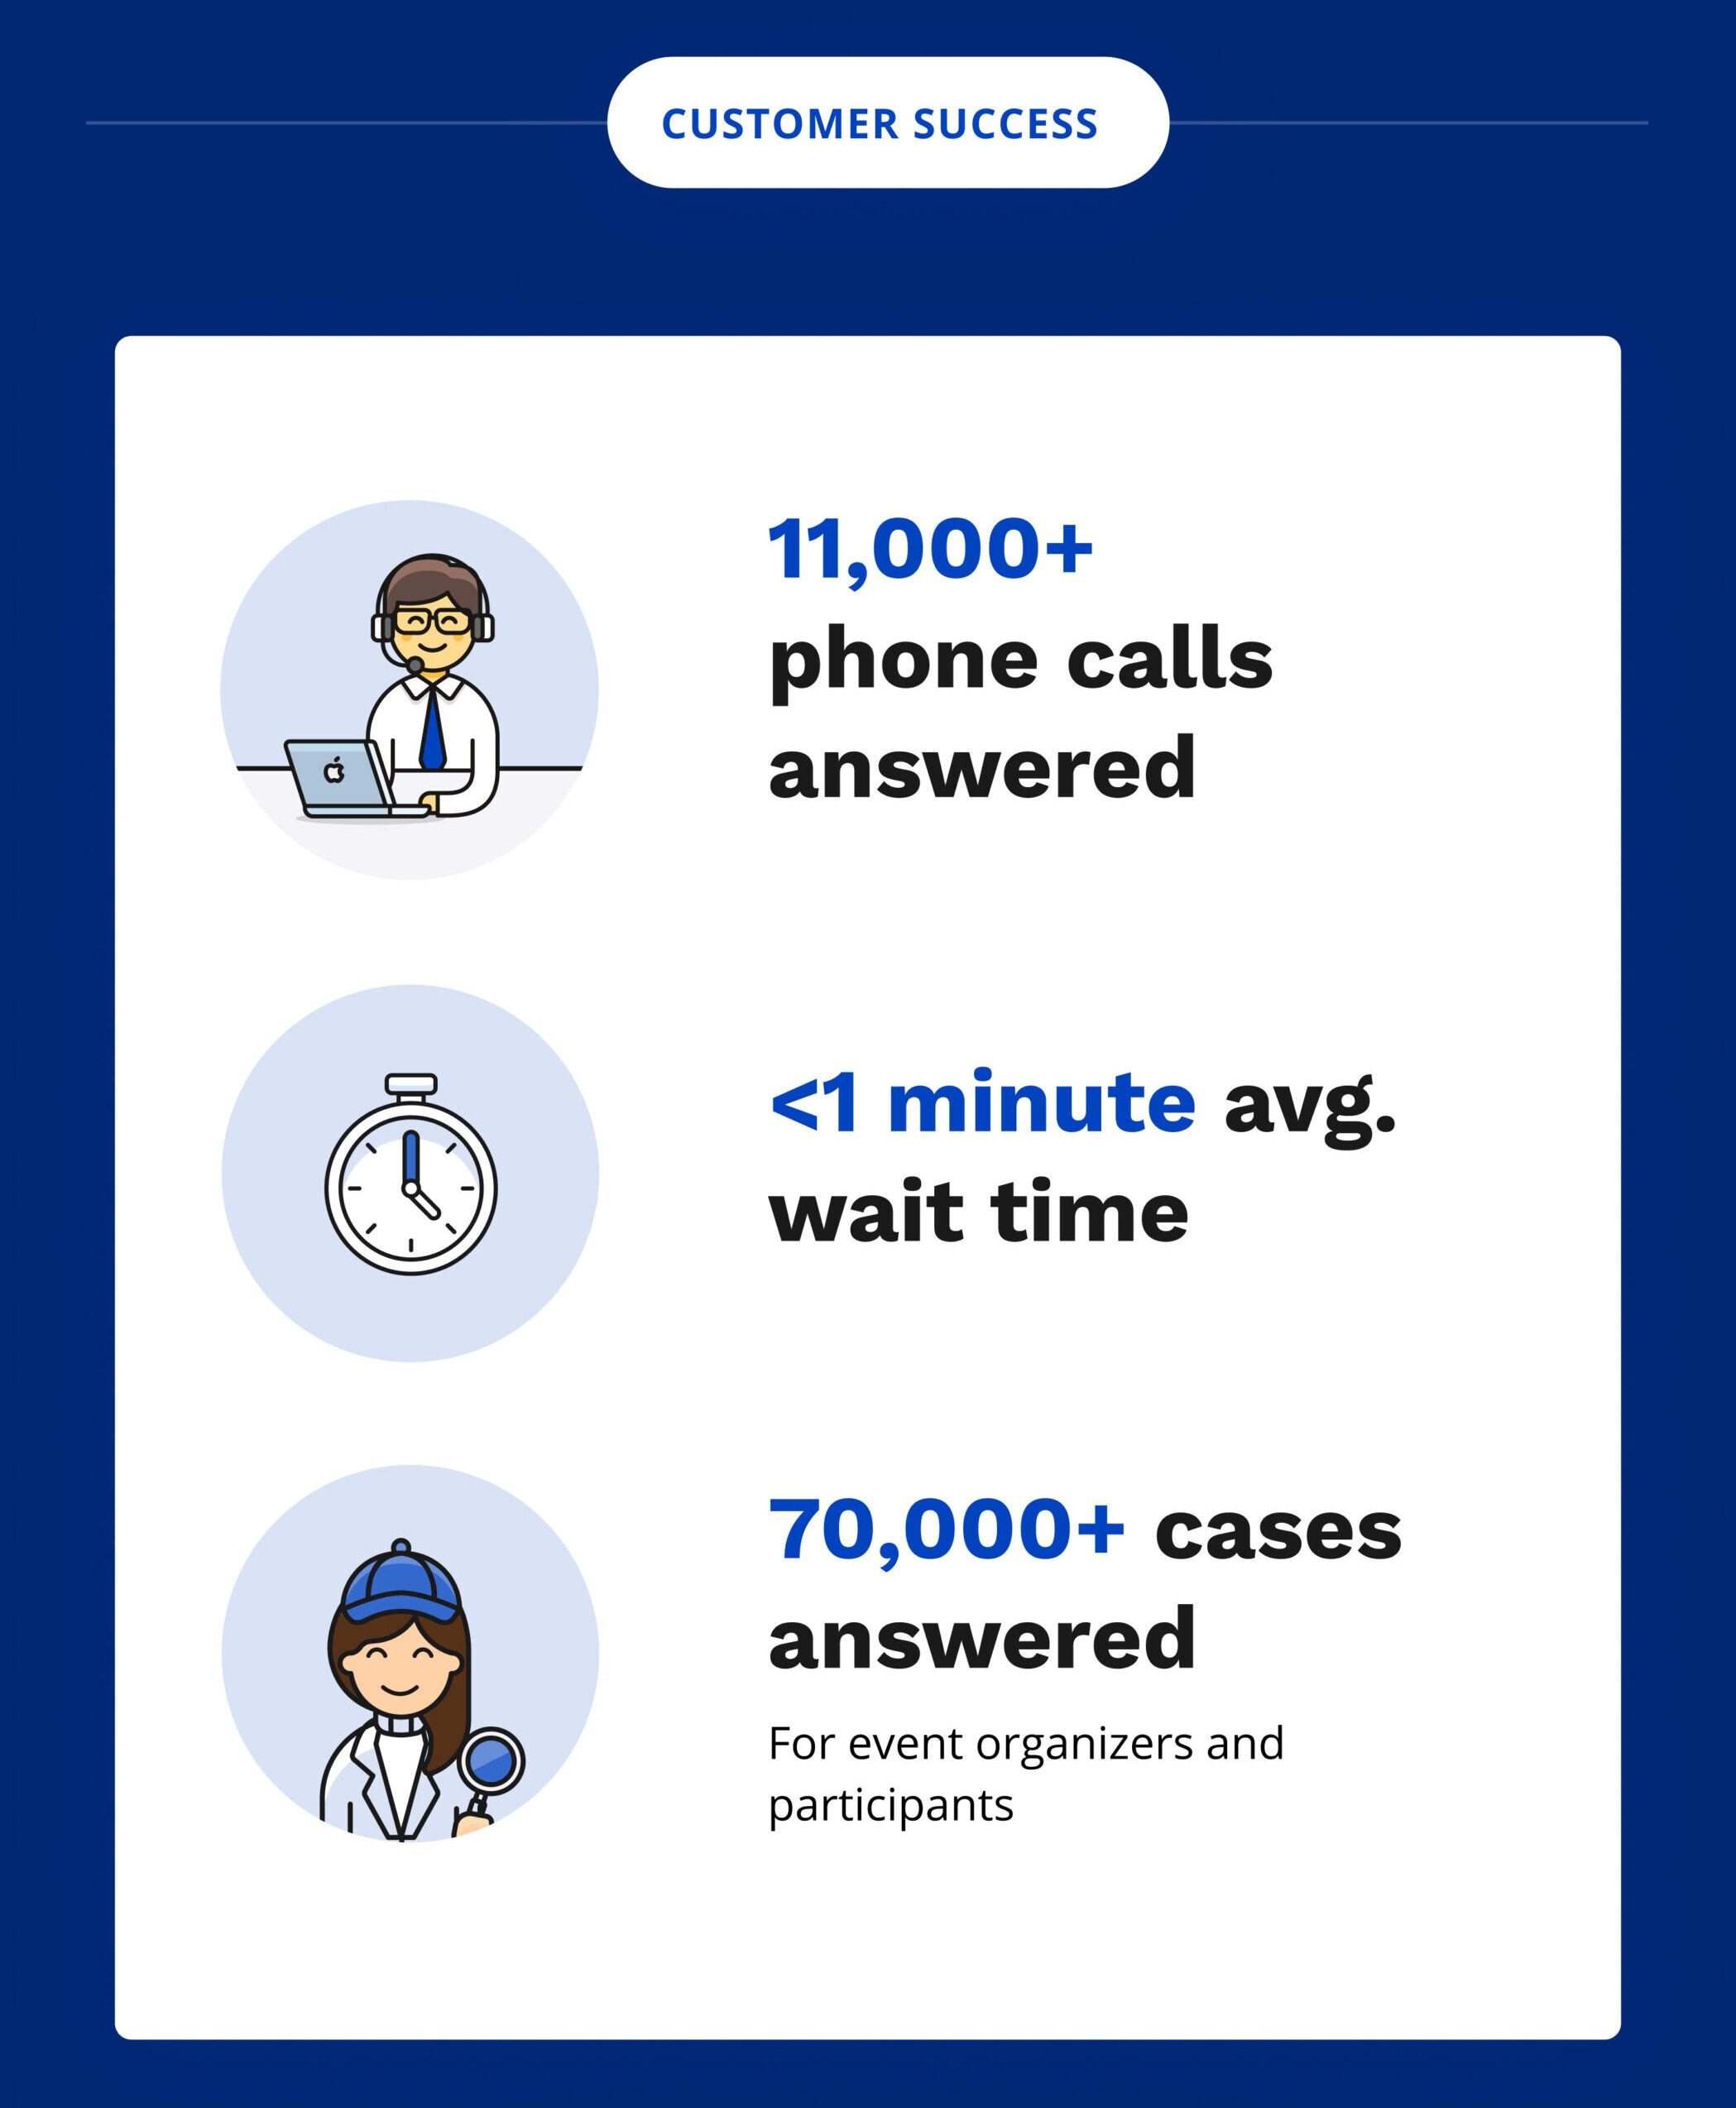 Custom Success: 11,000+ phone calls answered. Less than 1 minute average wait time. 70,000+ cases answered for event organizers and participants.